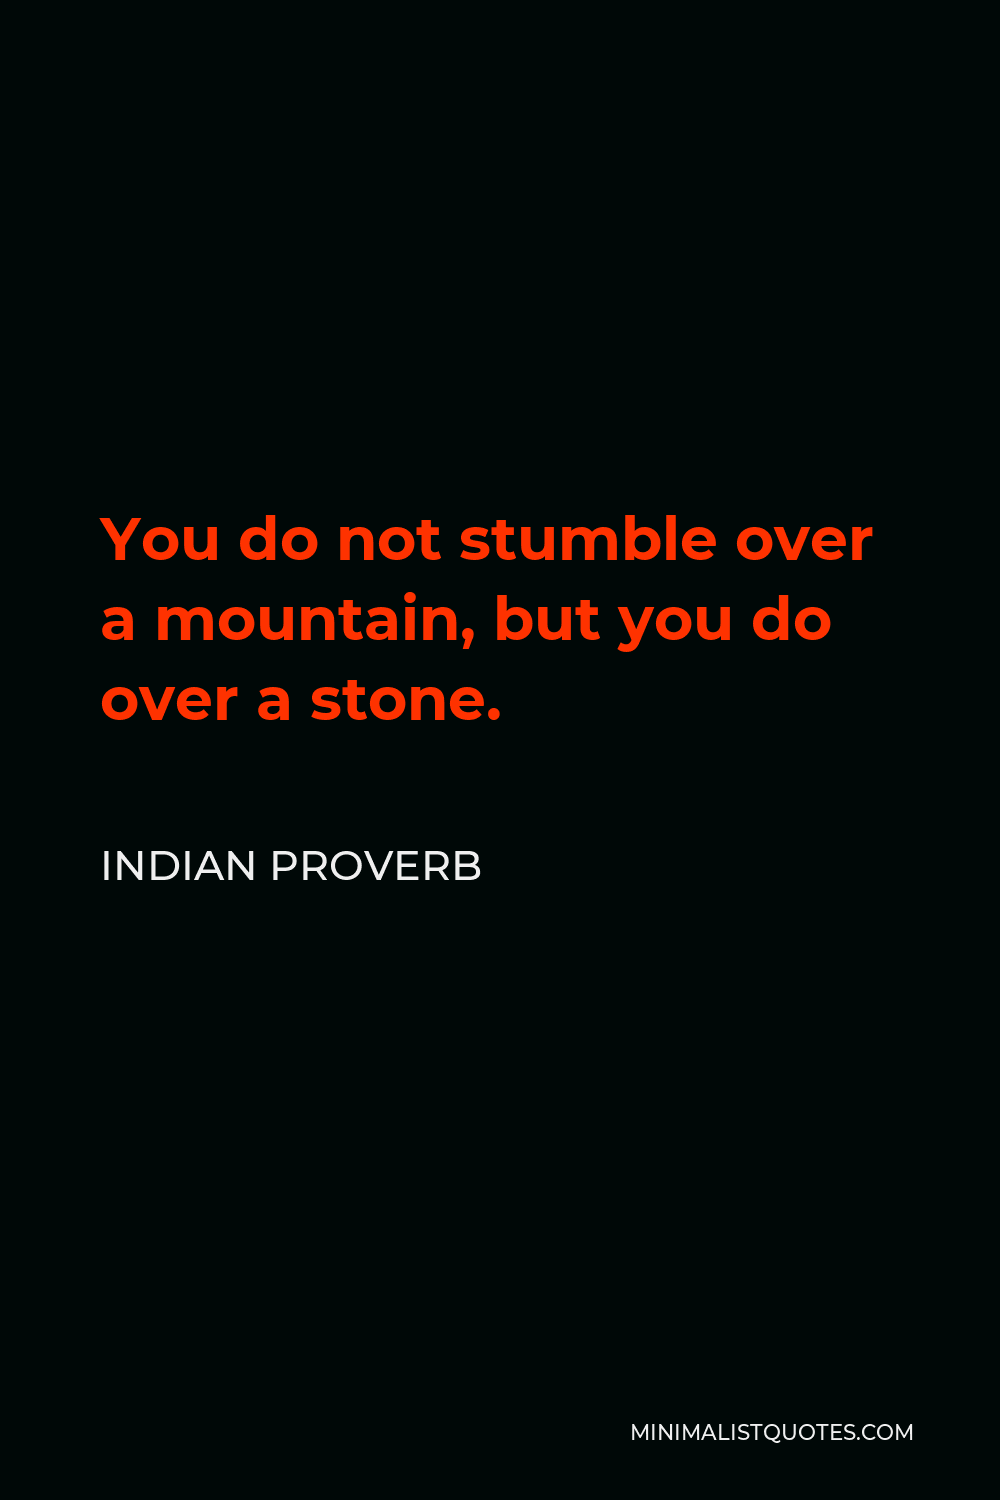 Indian Proverb Quote - You do not stumble over a mountain, but you do over a stone.